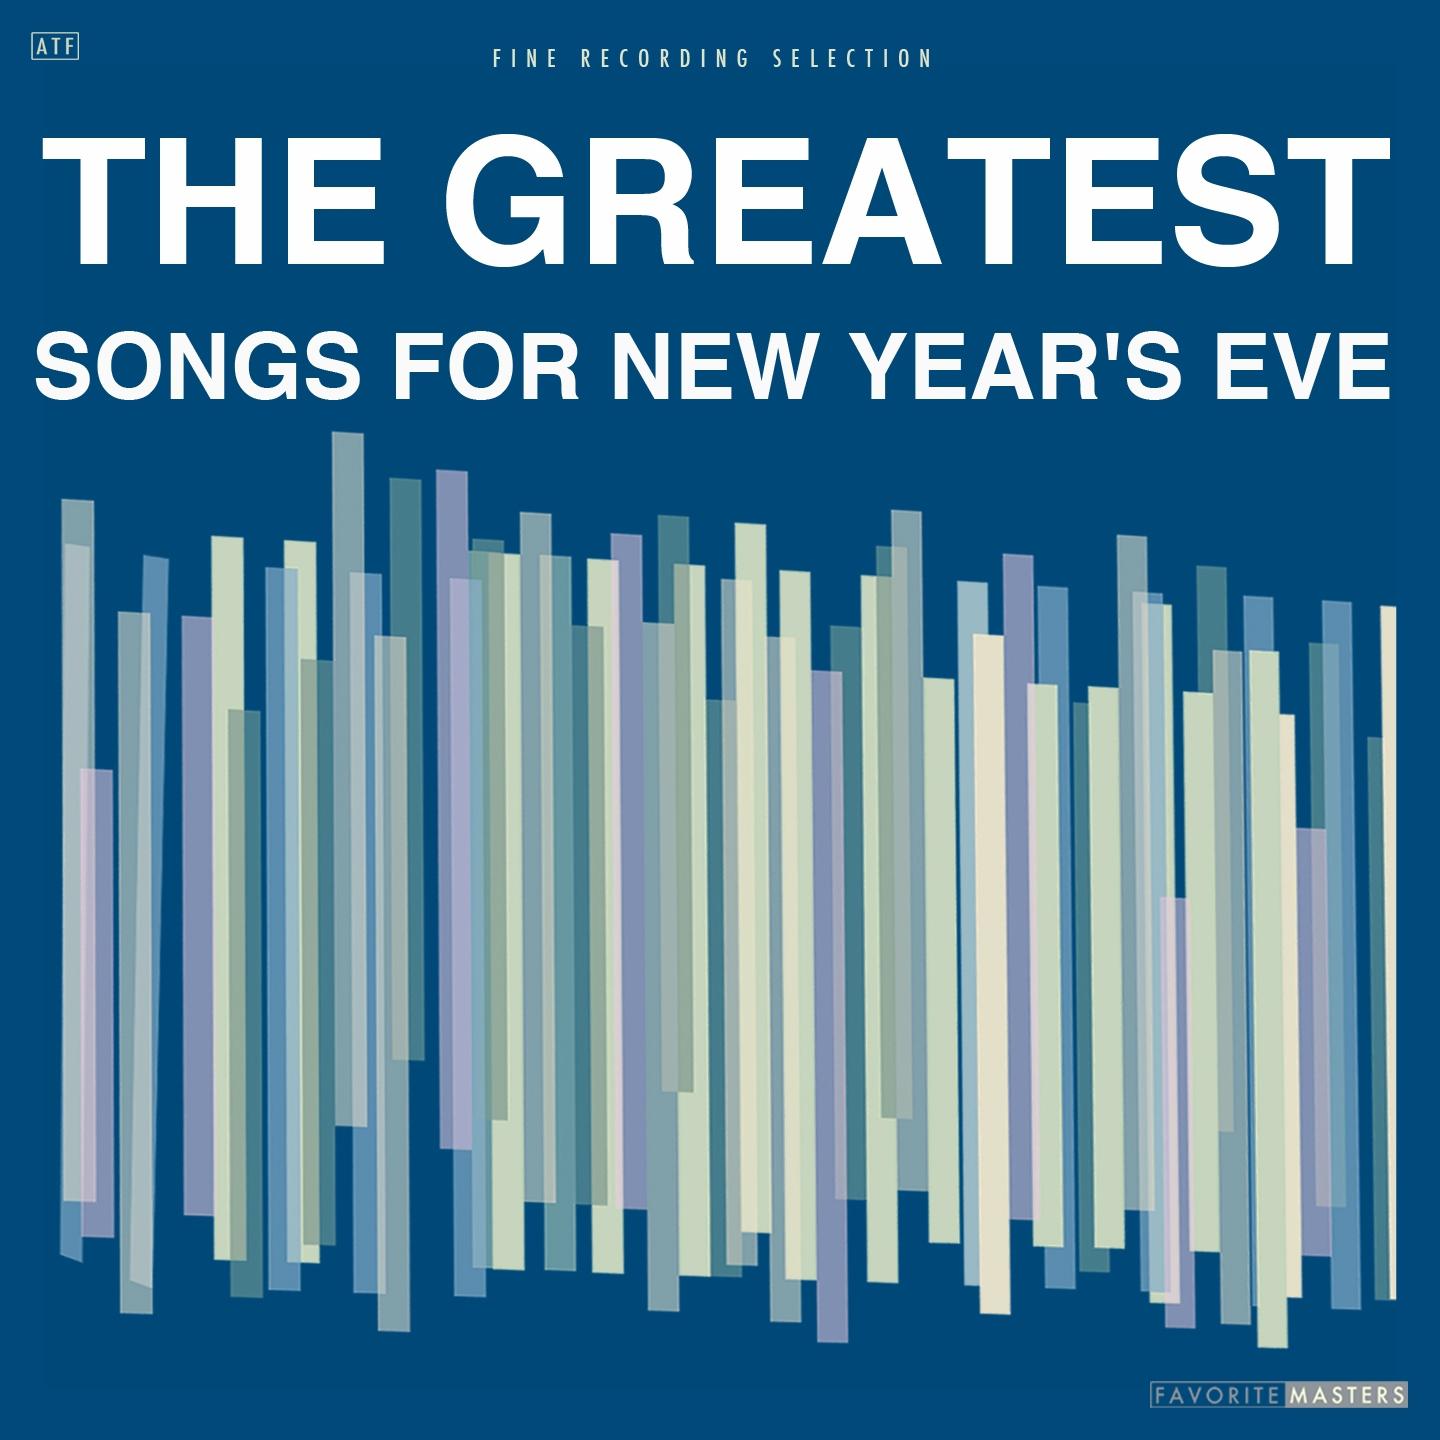 The Greatest Songs for New Year's Eve